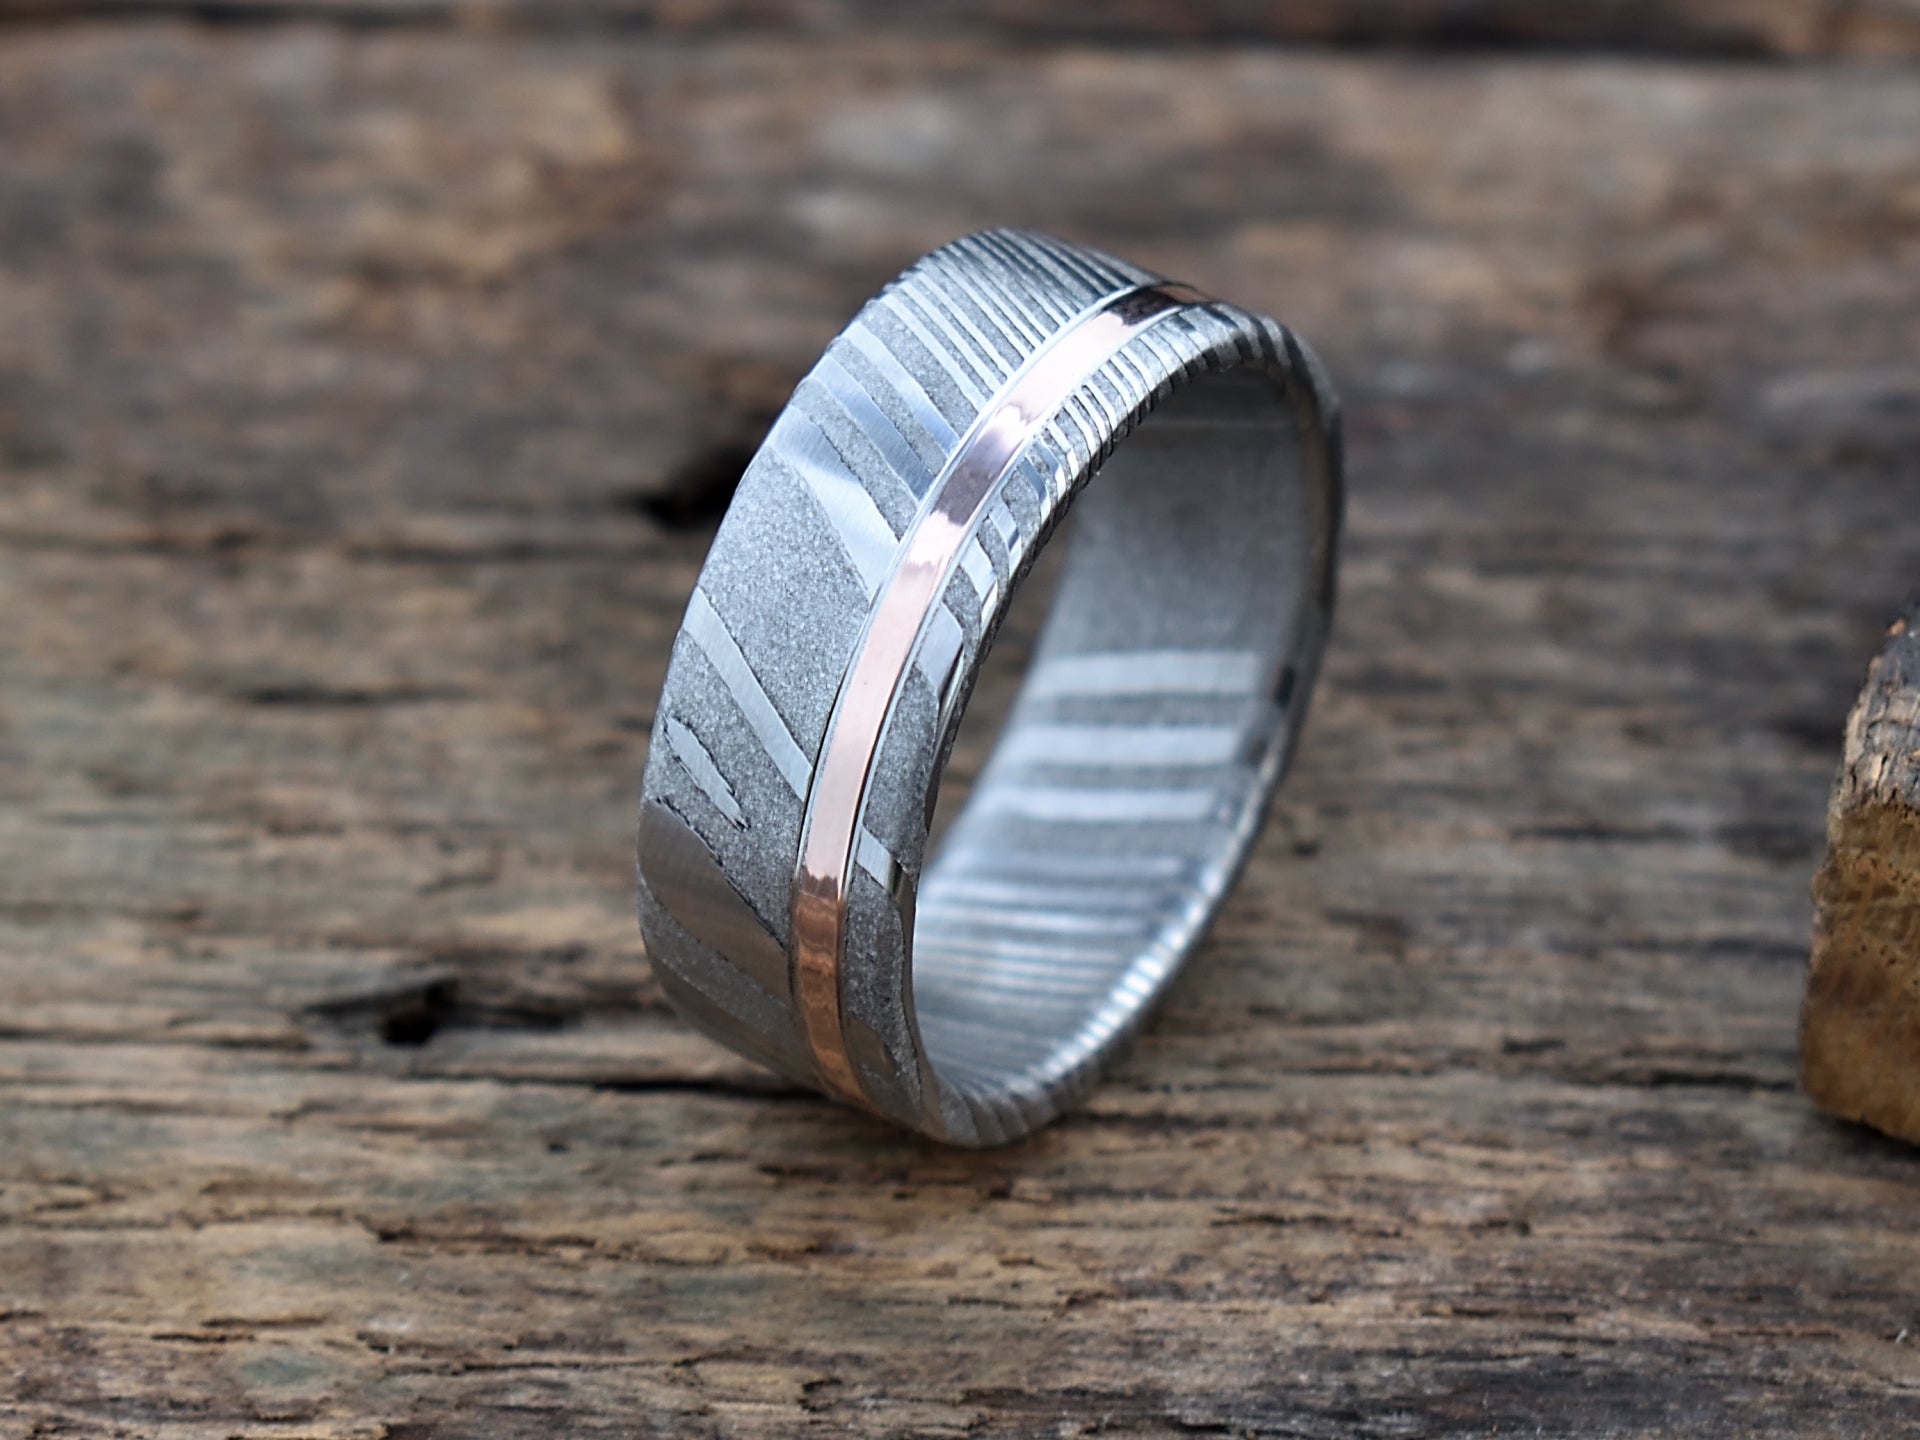 Stainless Steel Rings for Men Wedding Ring Cool Simple Band 8mm Width 3Pcs  A Set | eBay